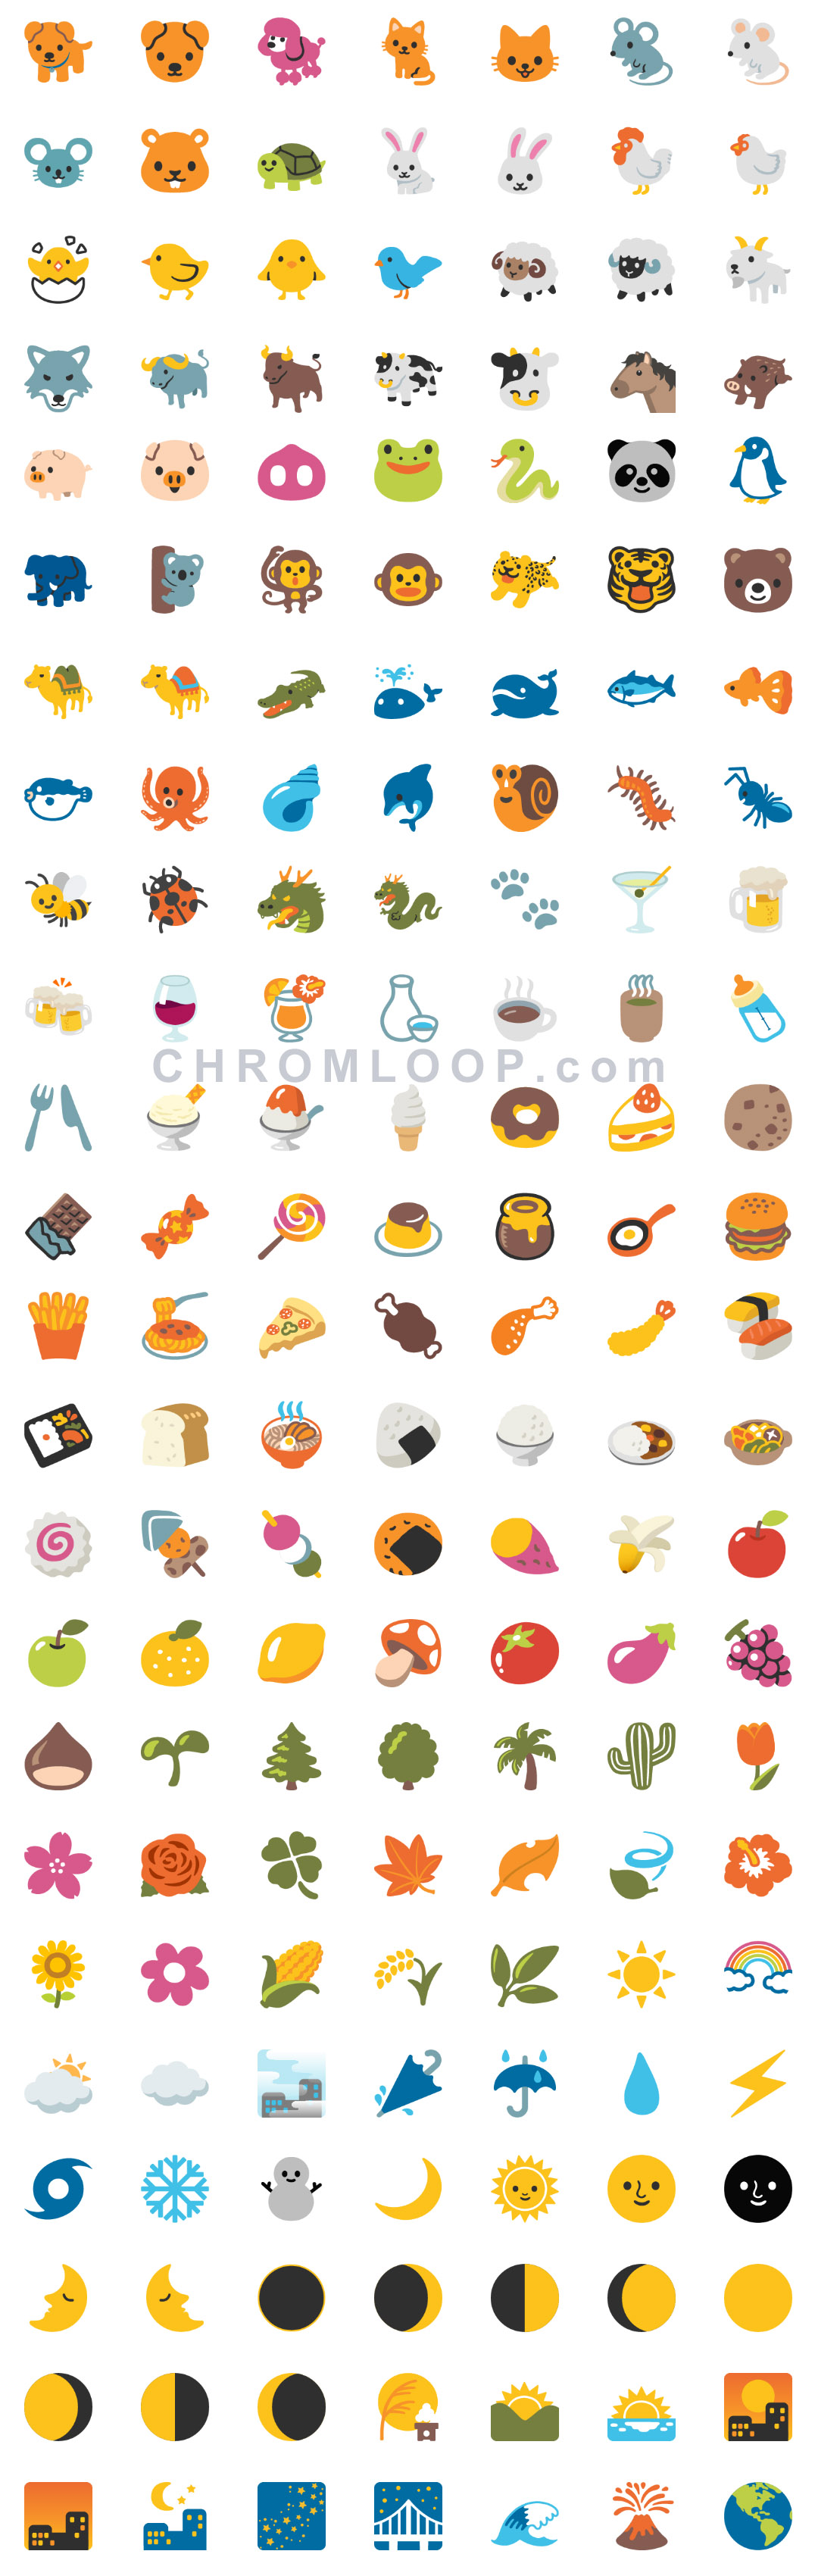 New emoji in Android N 2